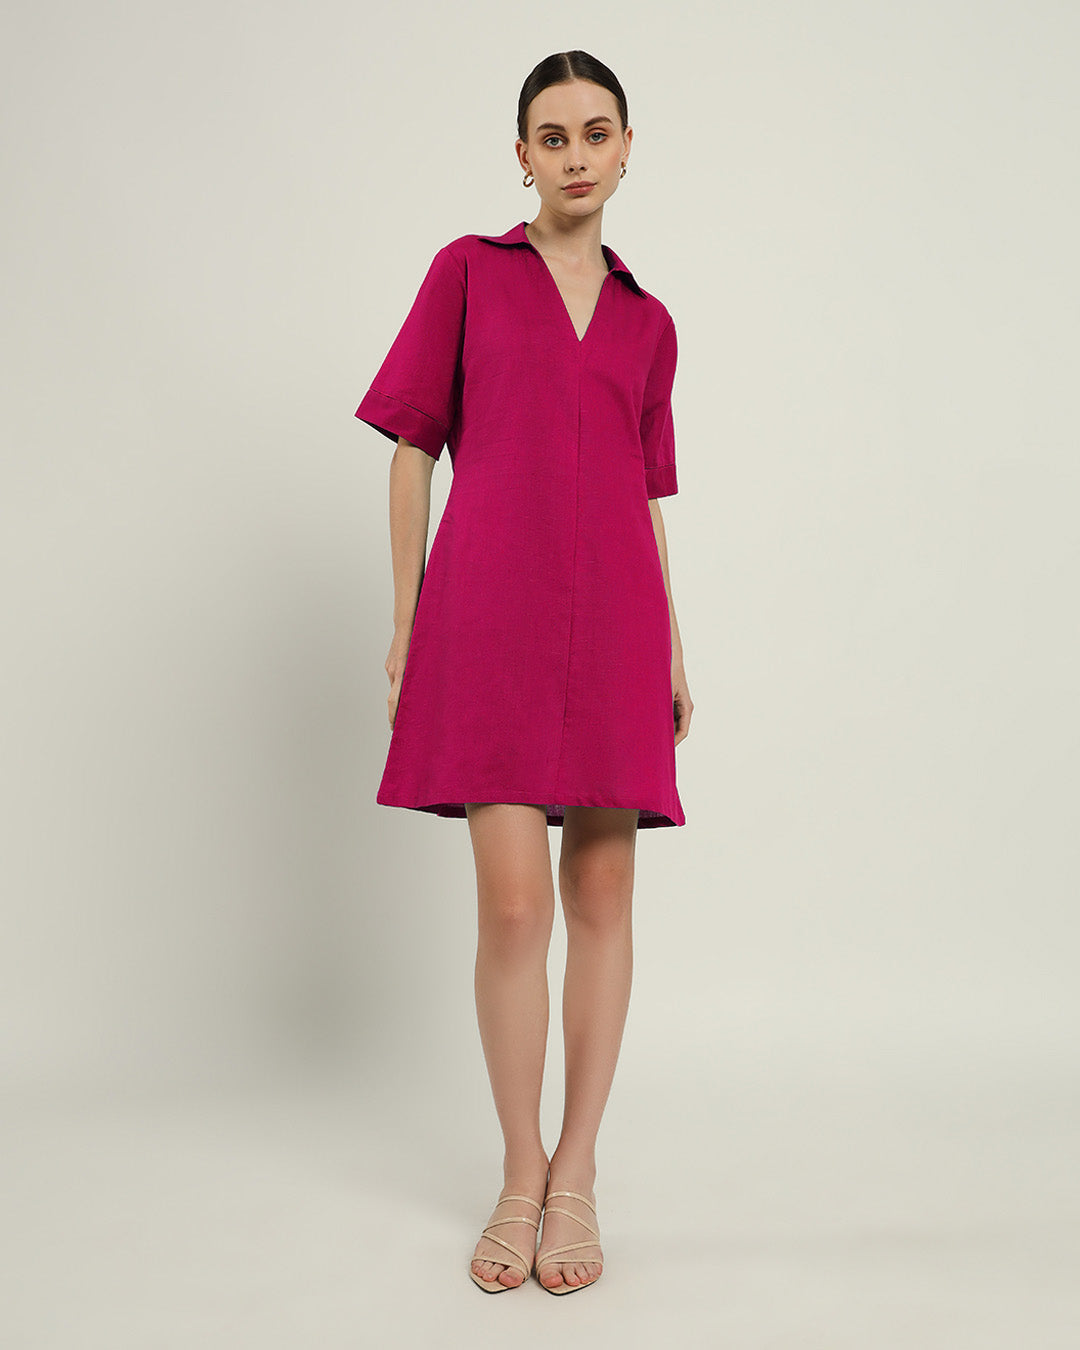 The Ermont Berry Dress